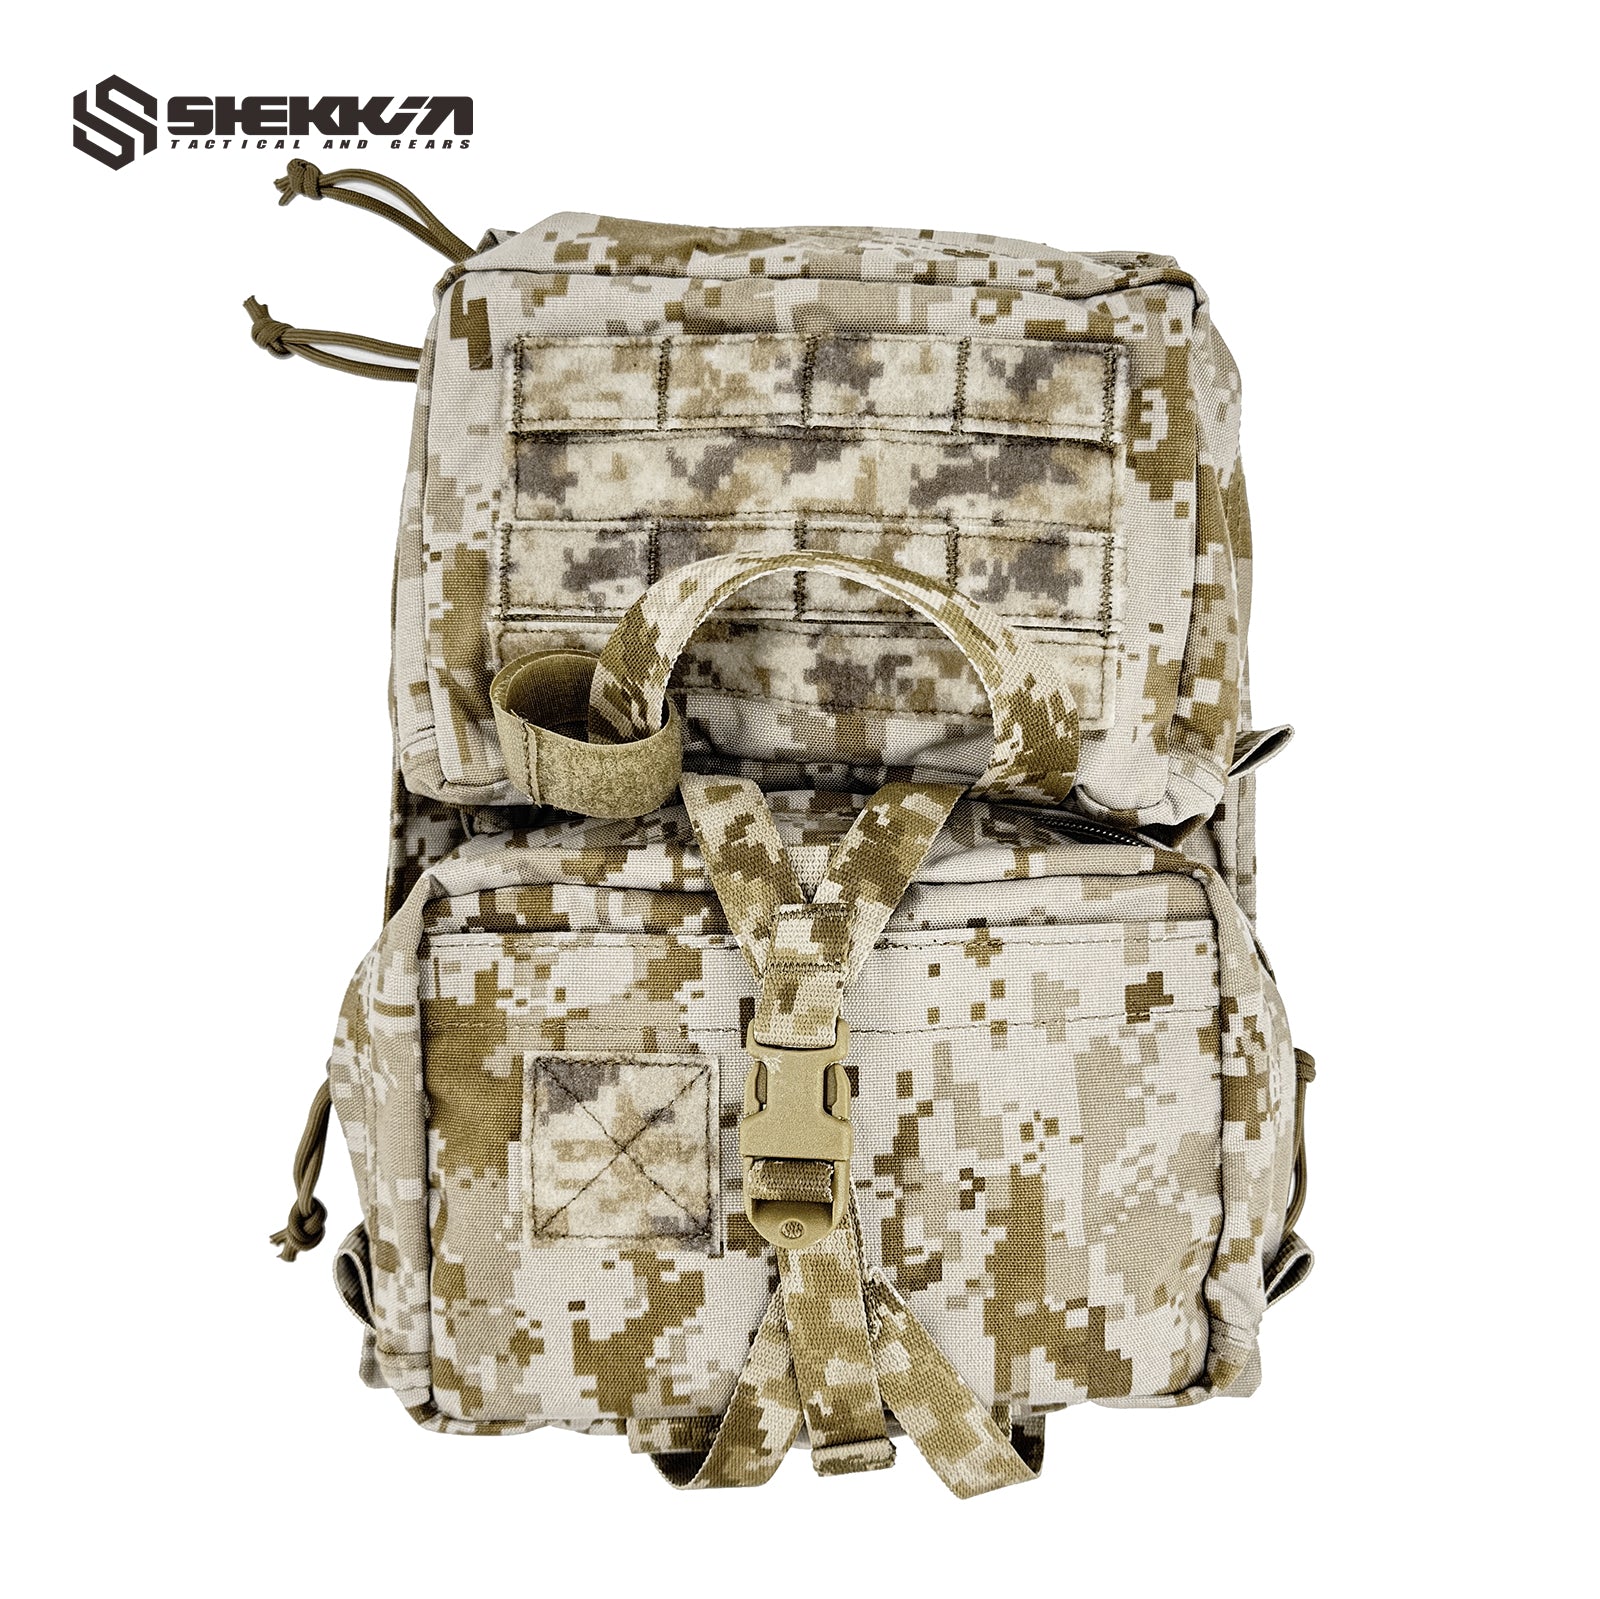 Special force tactical gear Multicam Mayflower style assault BackPanel